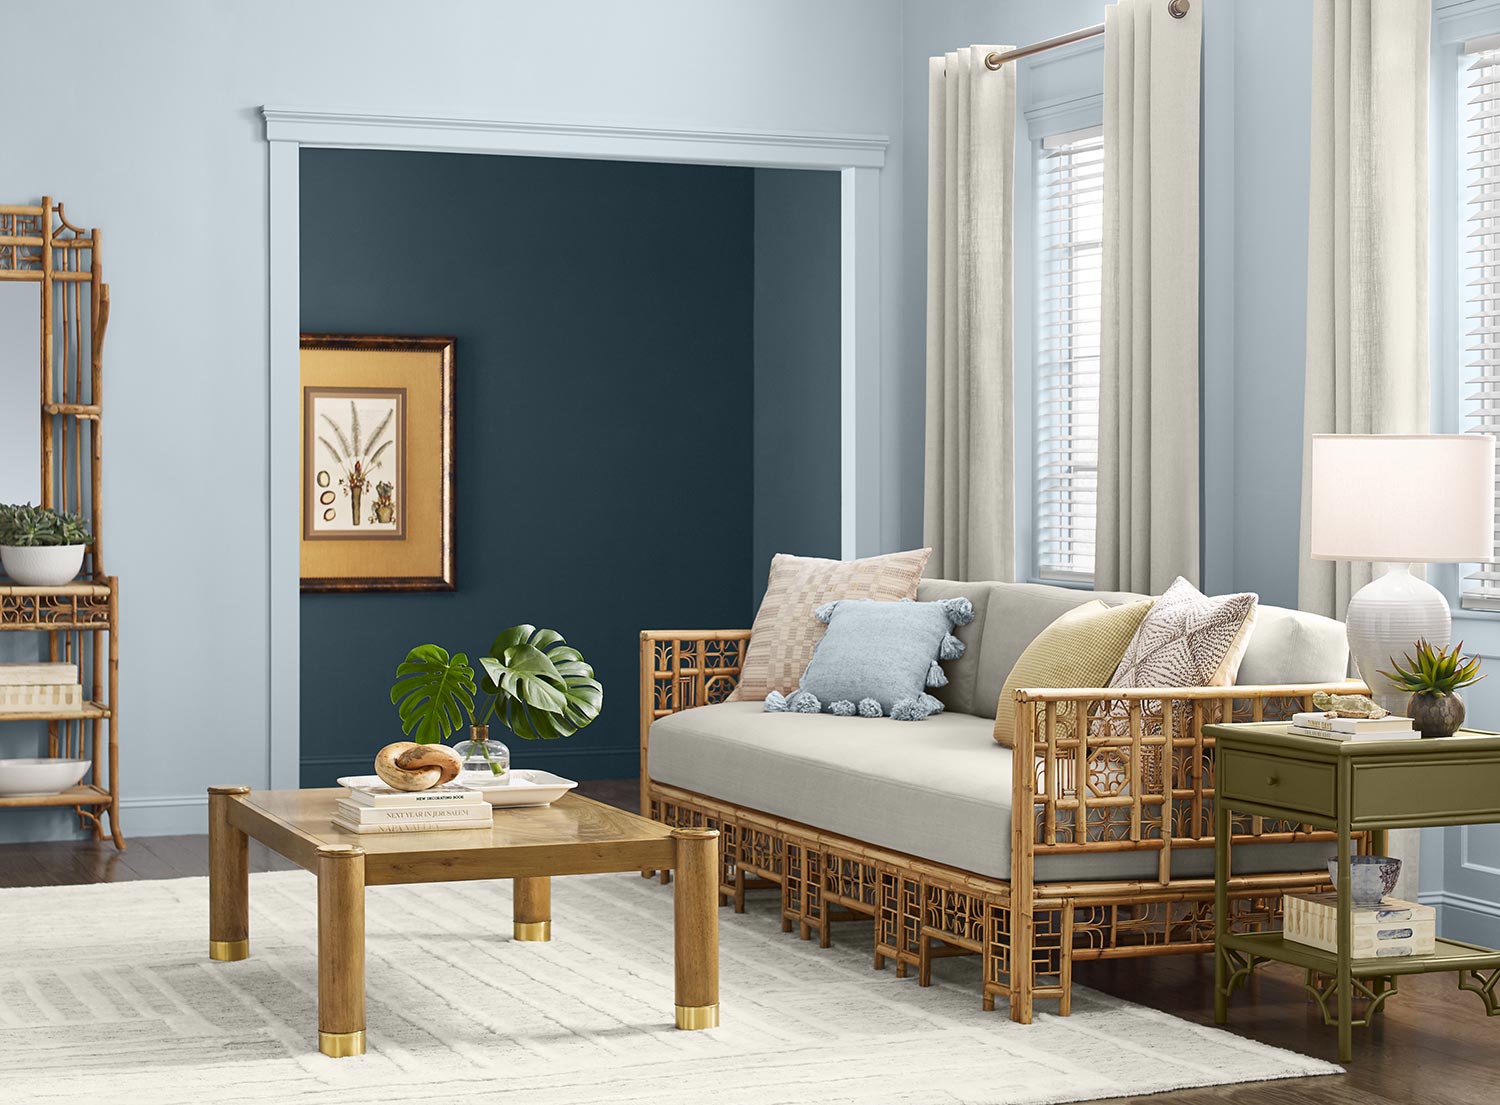 Coastal style living room with walls painted Upward SW 6239 and Gale Force SW 7605.